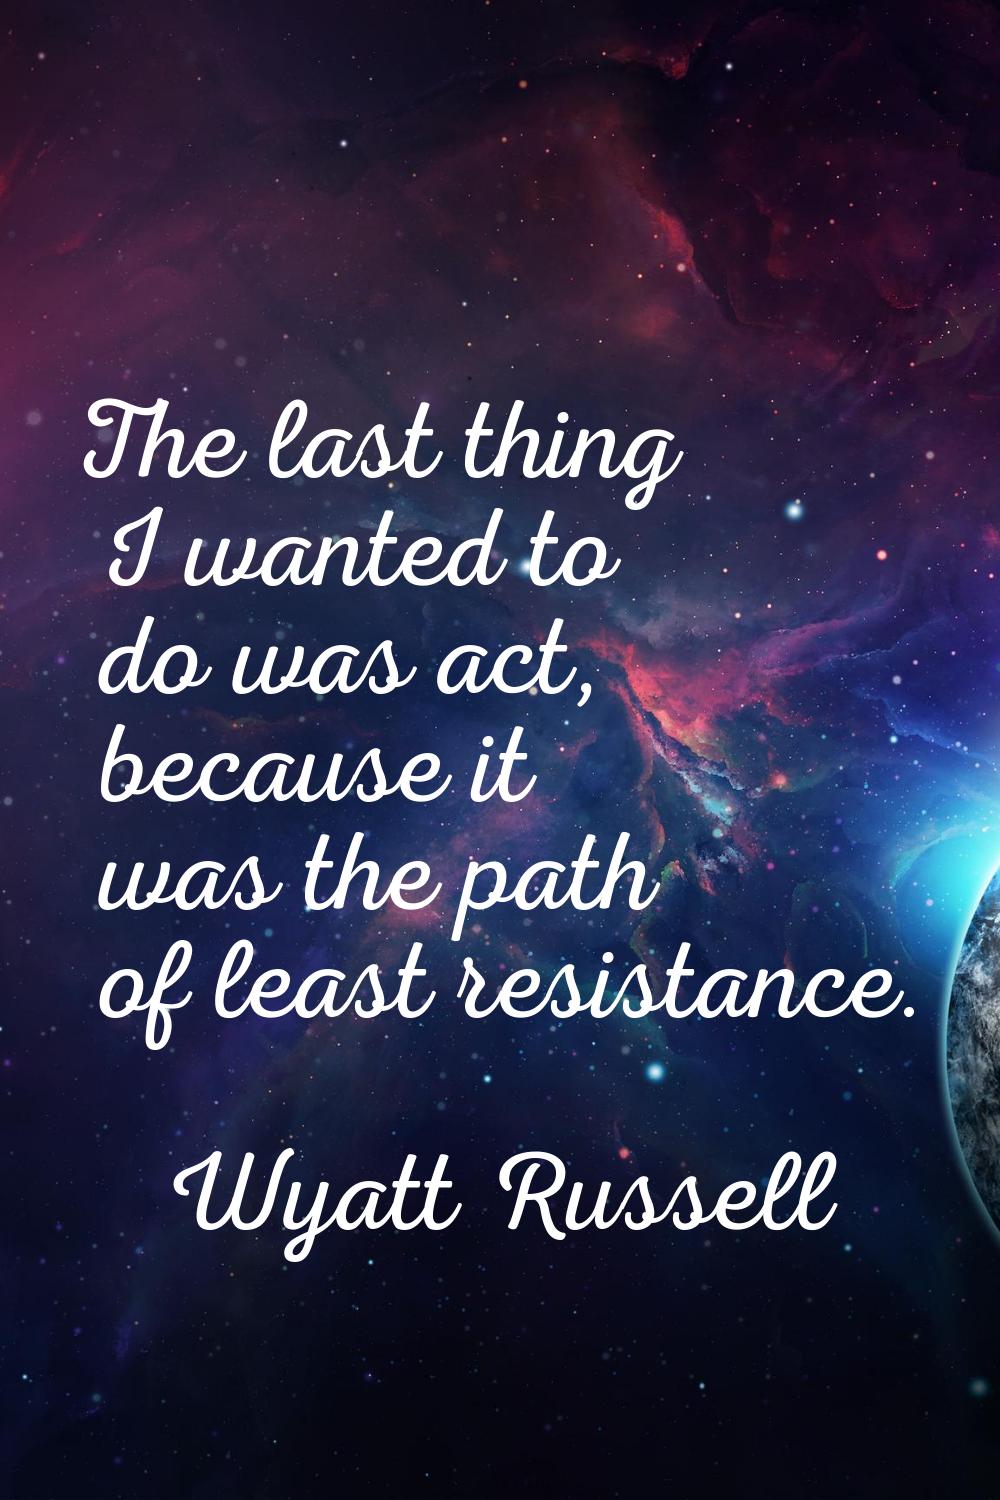 The last thing I wanted to do was act, because it was the path of least resistance.